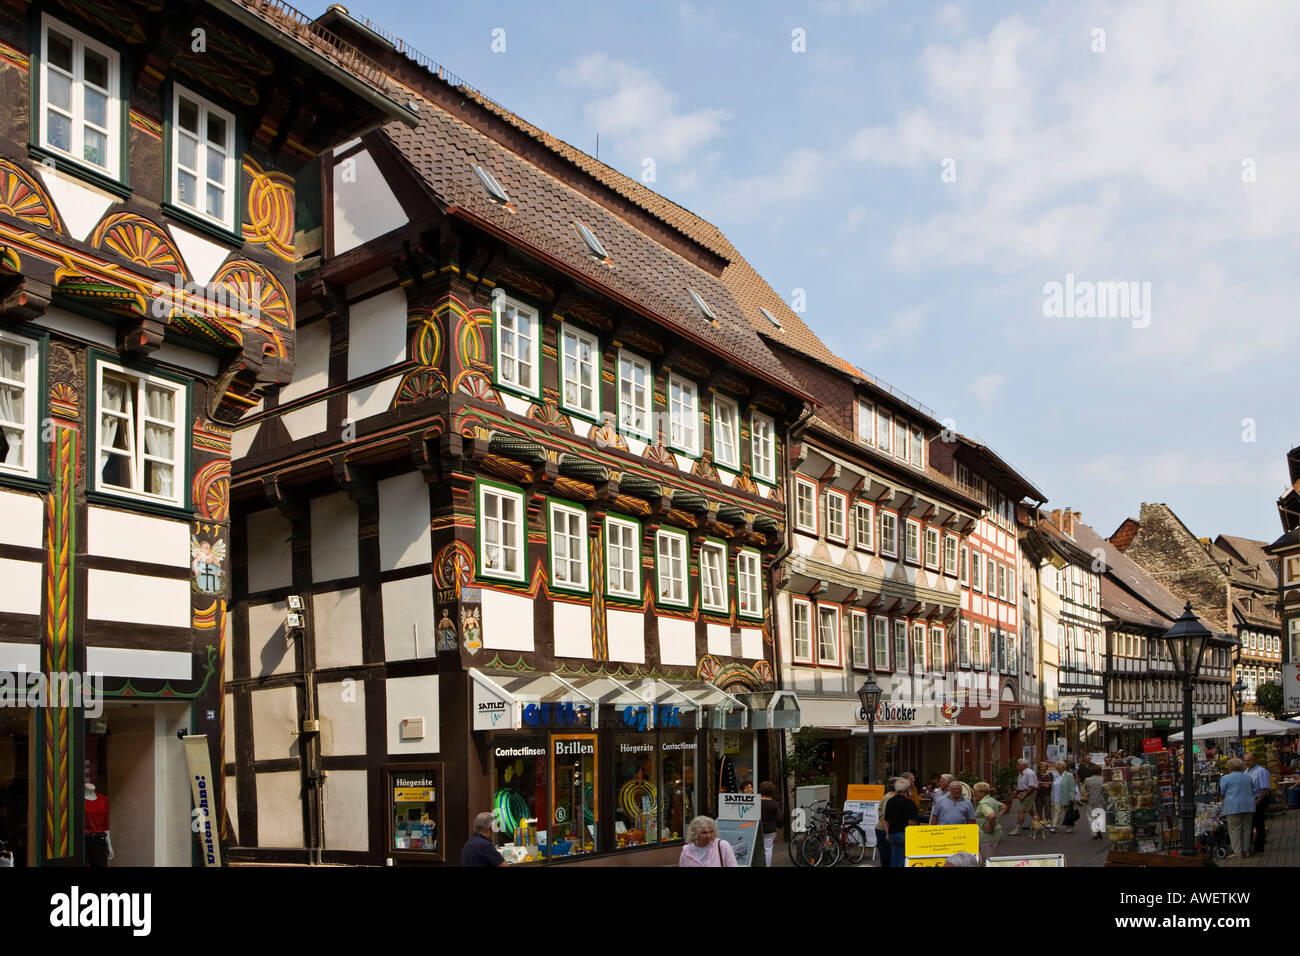 Northeim Lower Saxony High Resolution Stock Photography and Images - Alamy